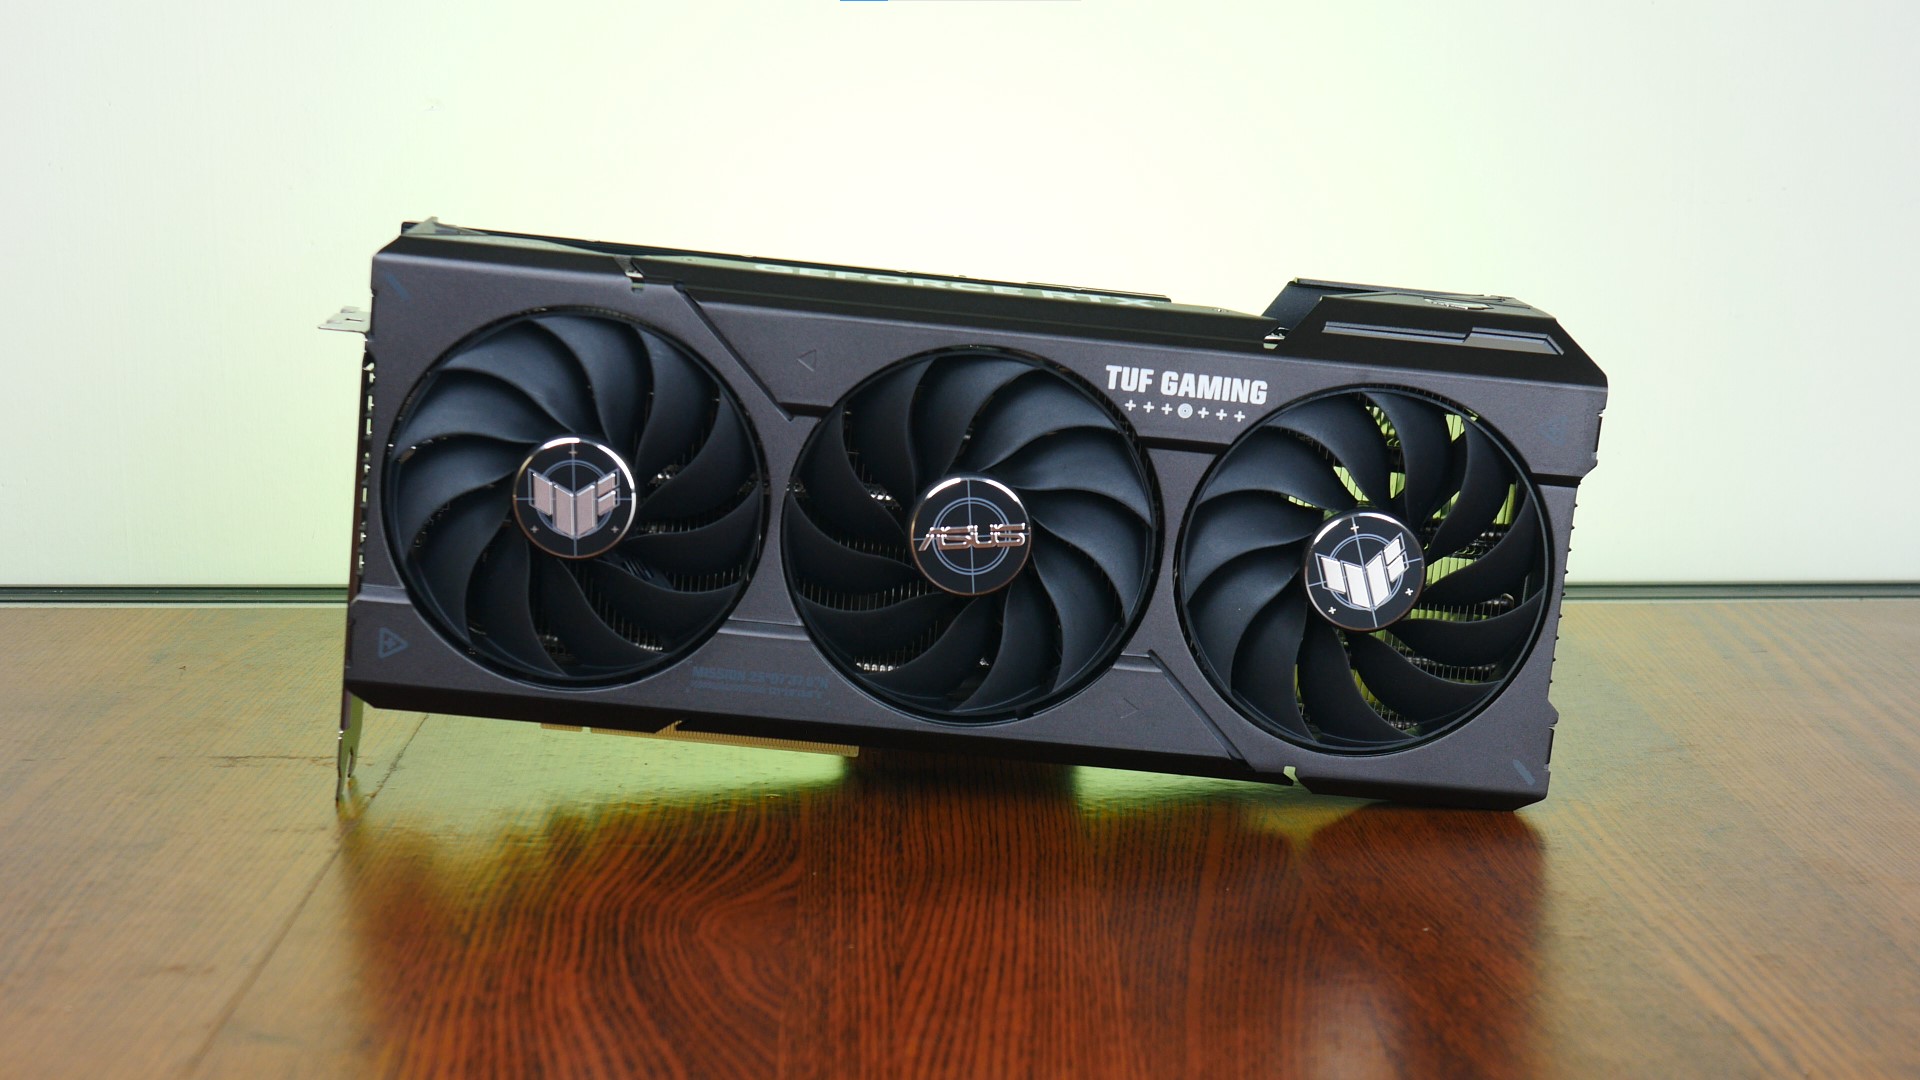 Review: ASUS TUF Gaming GeForce RTX 4070 12GB GDDR6X OC Edition